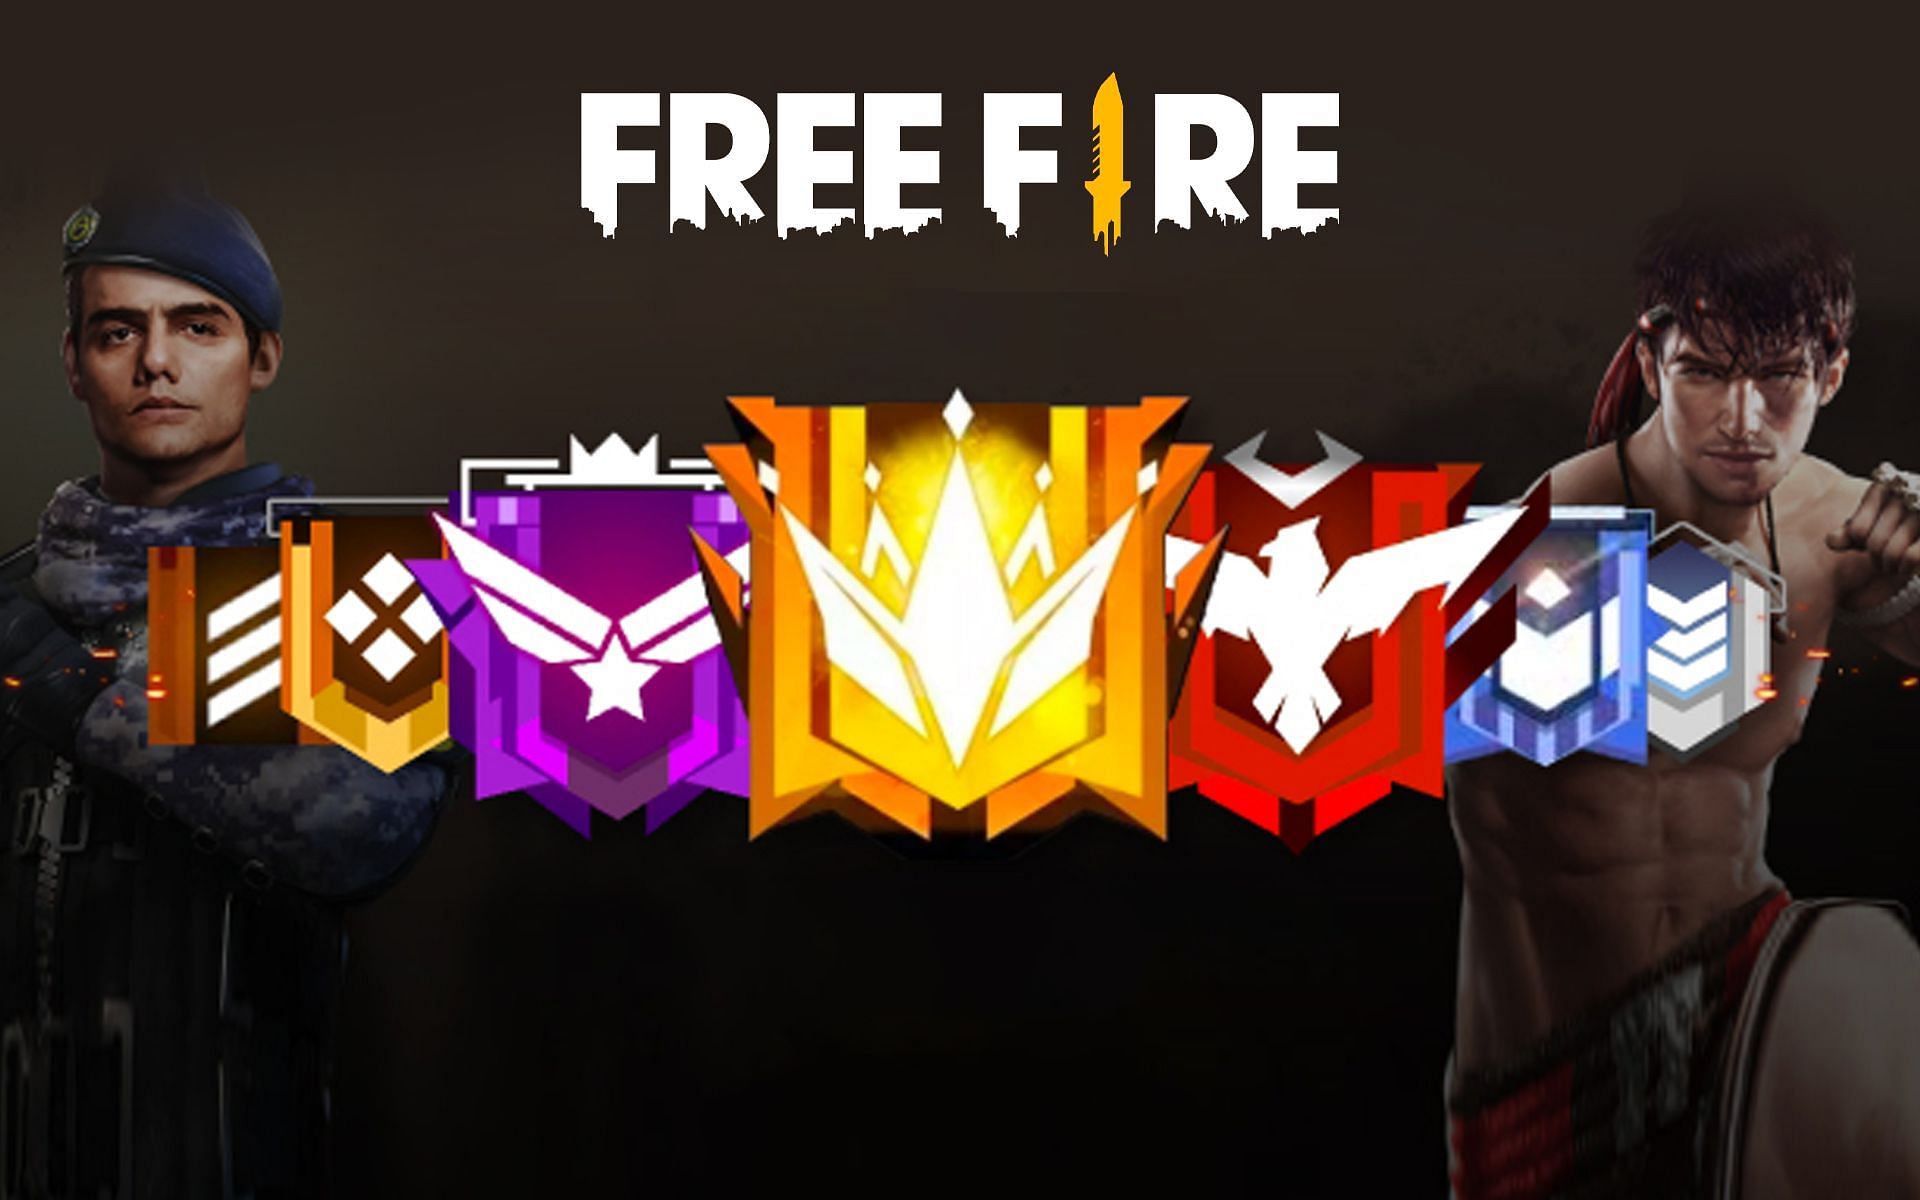 100+] Free Fire Heroic Wallpapers | Wallpapers.com